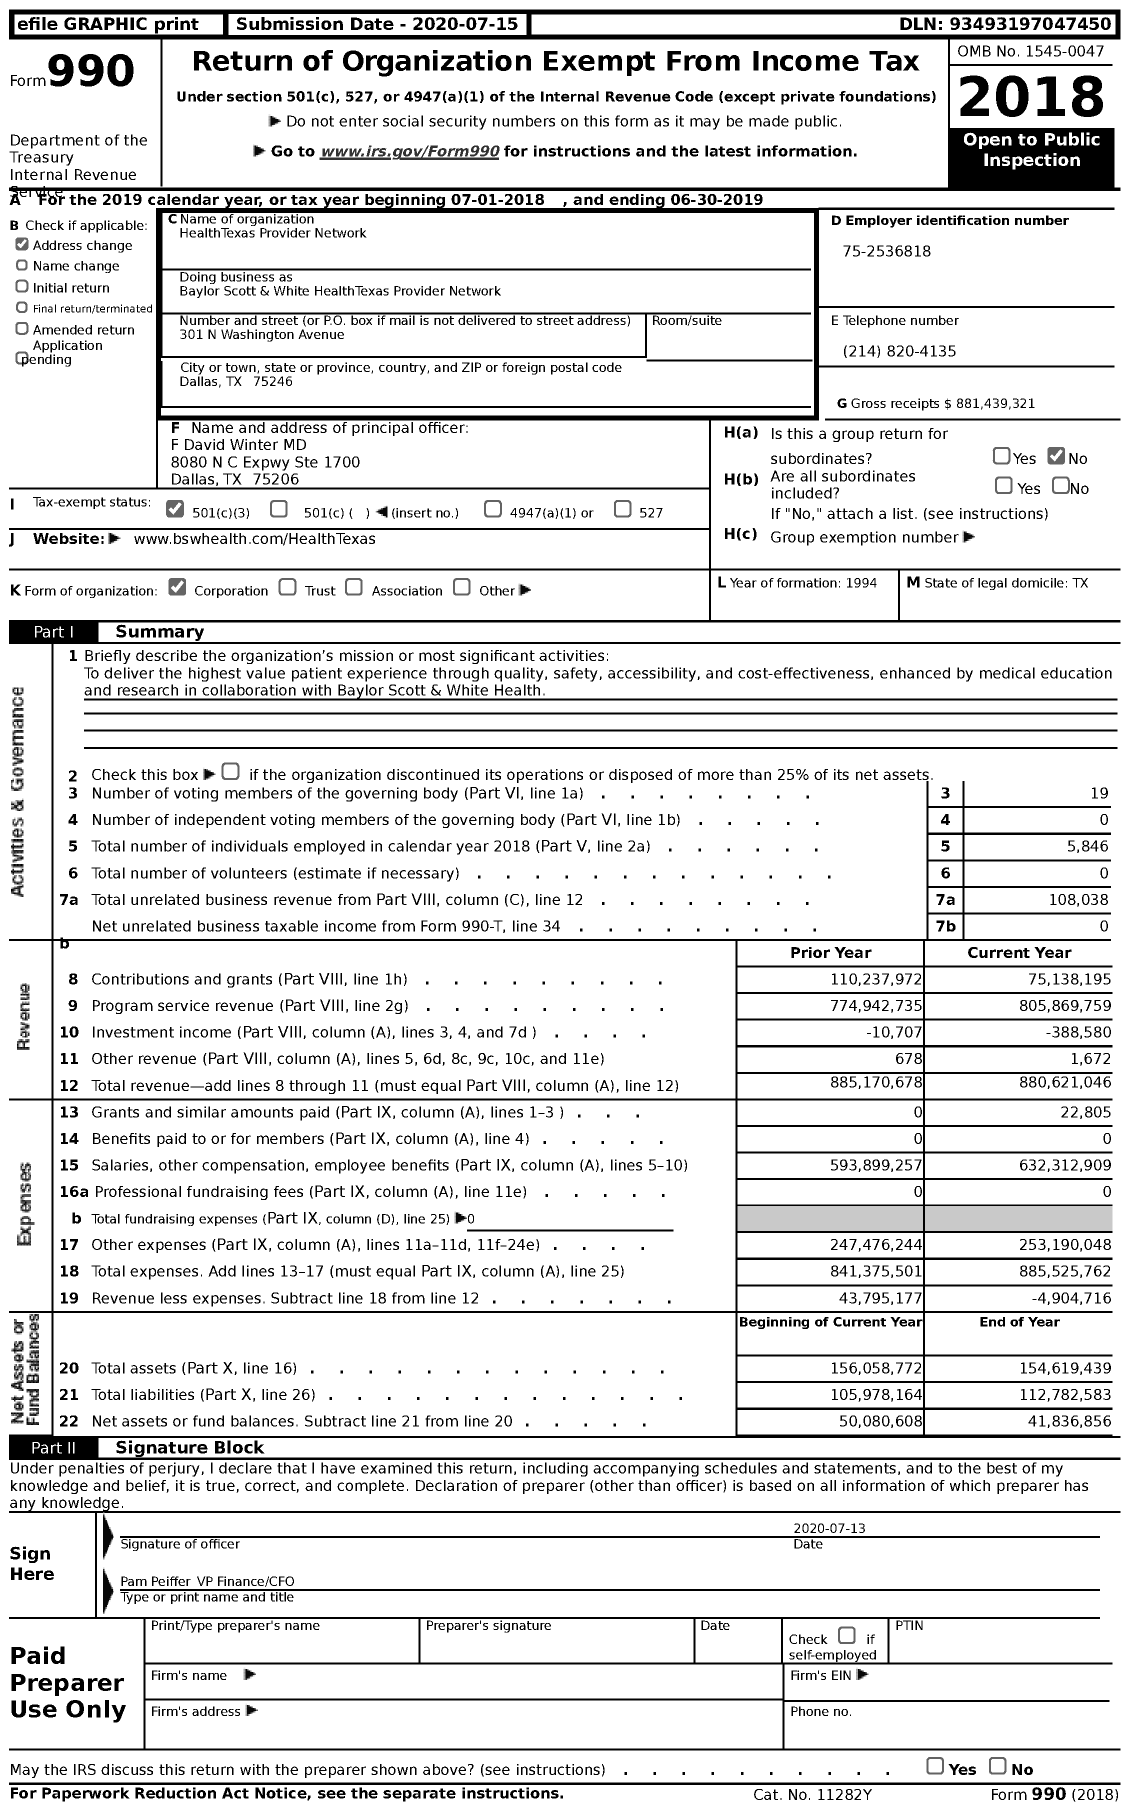 Image of first page of 2018 Form 990 for Baylor Scott & White HealthTexas Provider Network